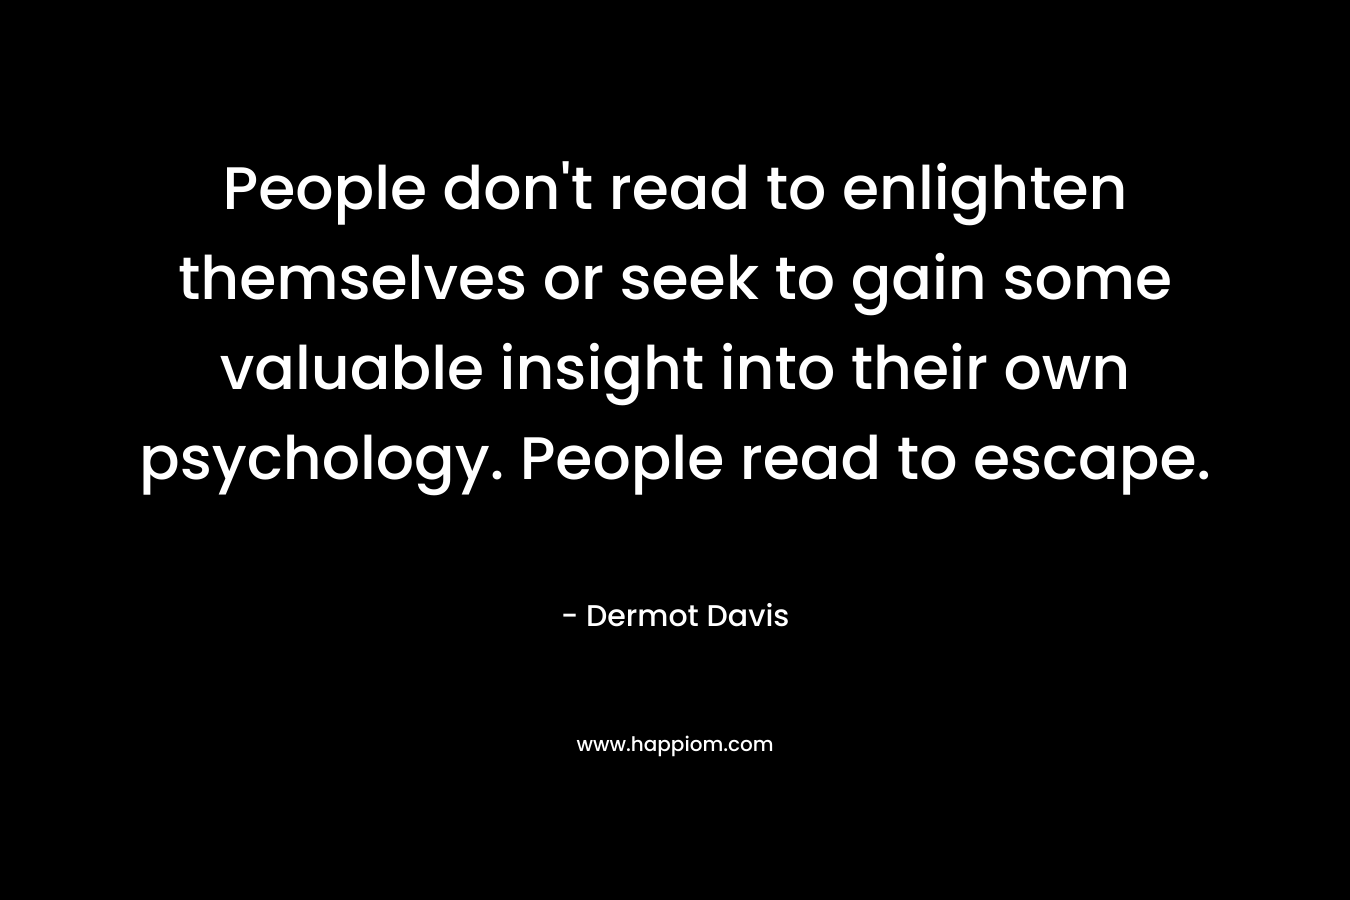 People don't read to enlighten themselves or seek to gain some valuable insight into their own psychology. People read to escape.